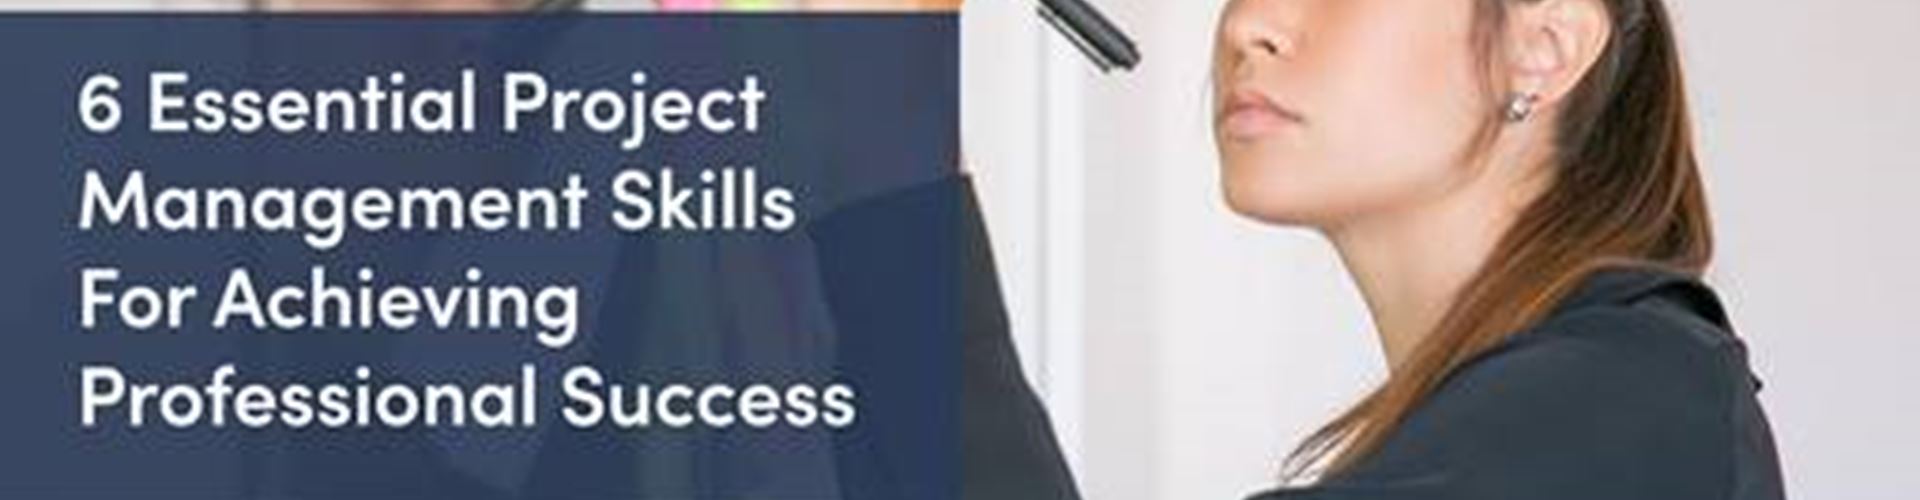 6 Essential Project Management Skills For Achieving Professional Success